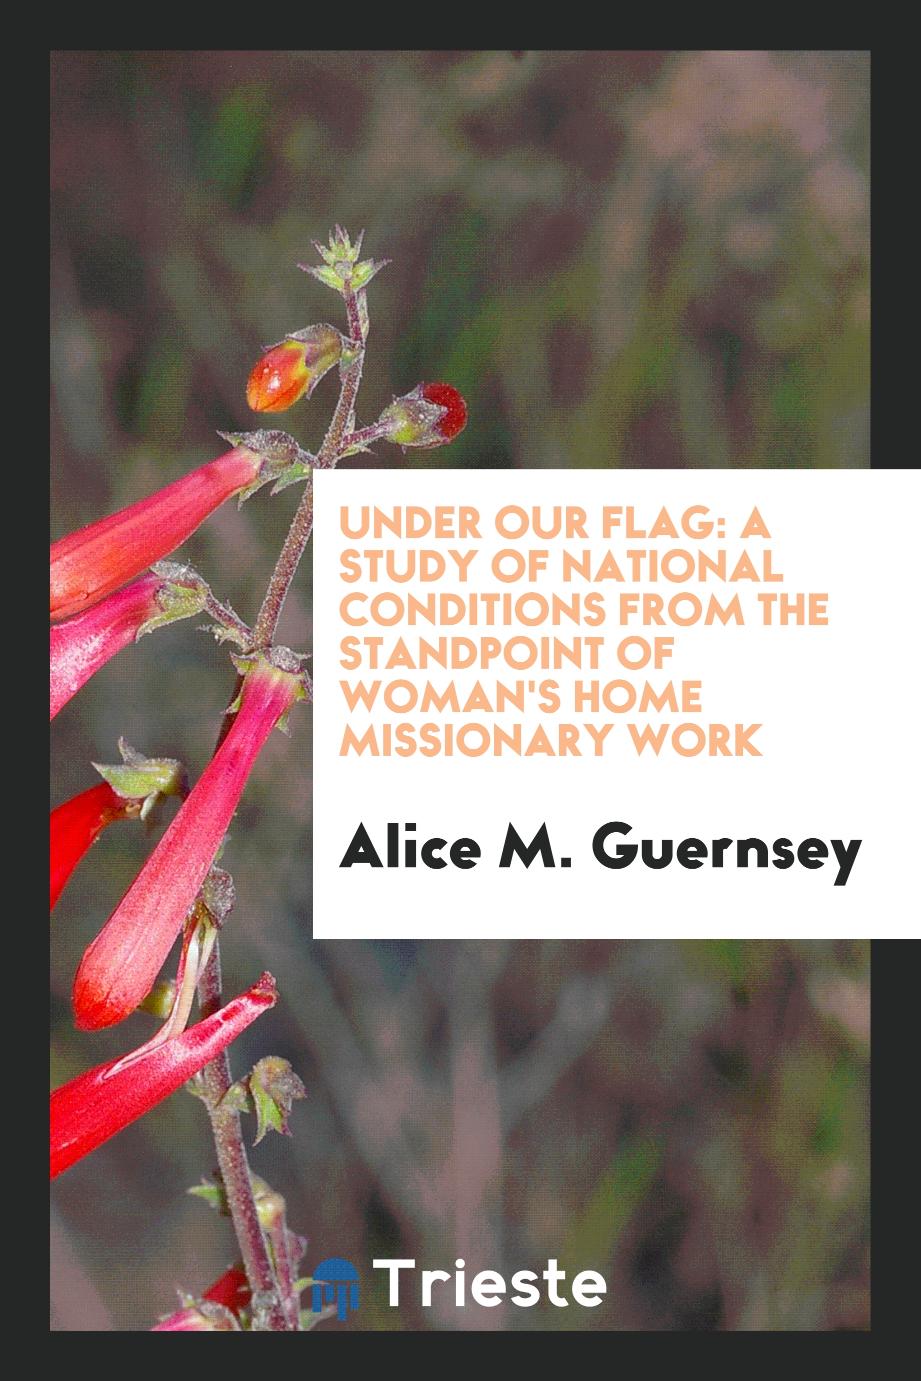 Under our flag: a study of national conditions from the standpoint of woman's home missionary work